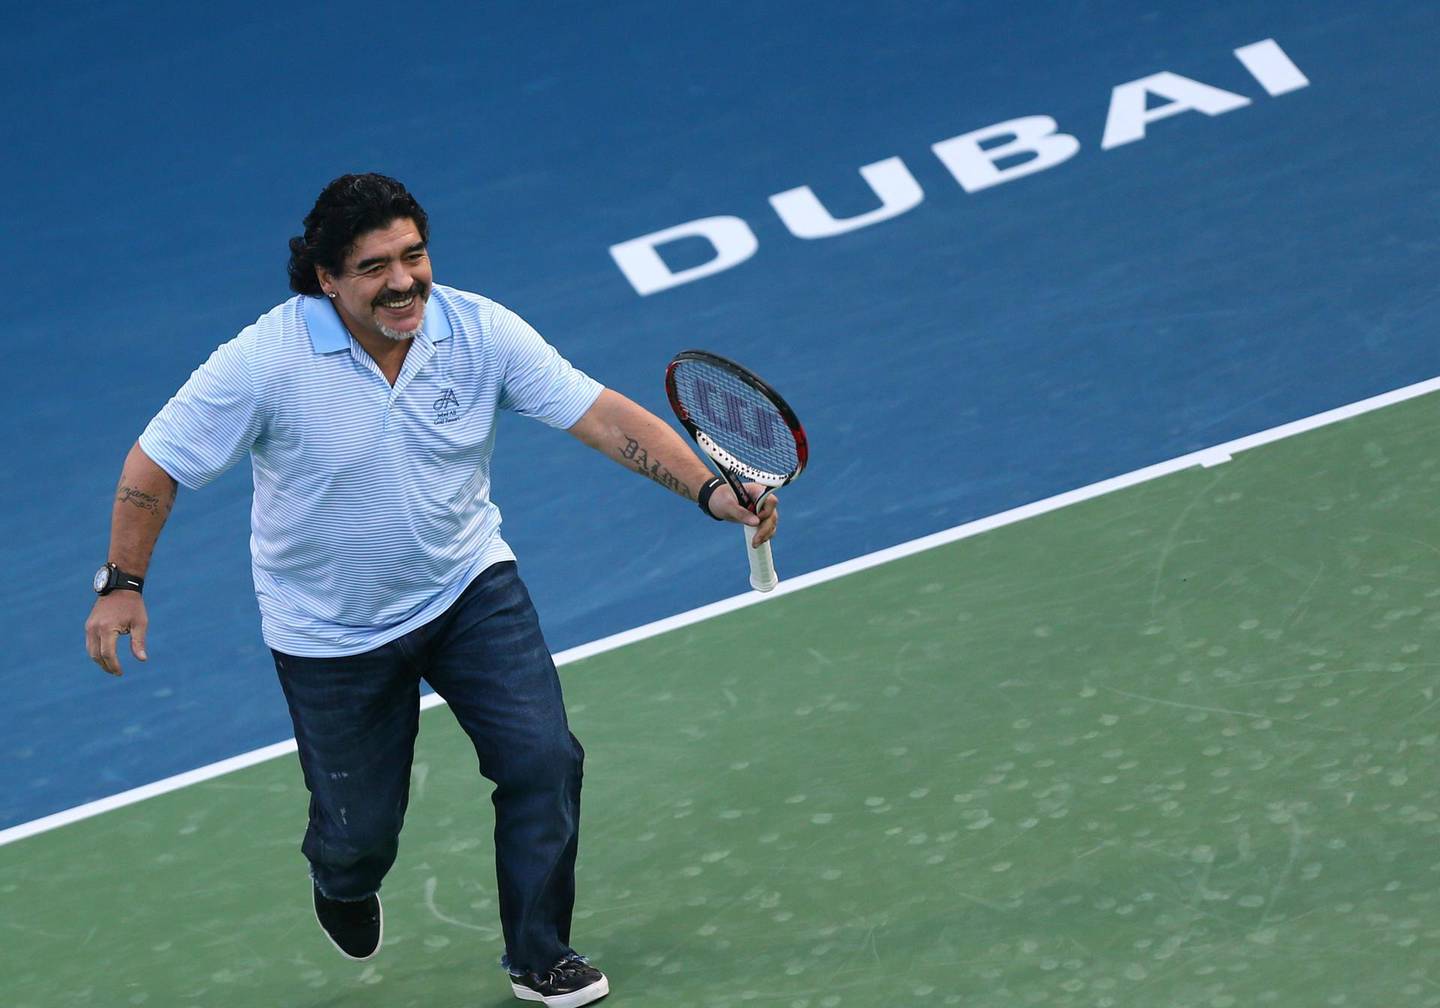 Argentina's football legend Diego Maradona runs as he plays against his compatriot tennis player Juan Martin Del Potro during a show following Del Potro's victory against India's Somdev Devvarman during the ATP Dubai Open tennis tournament in the Gulf emirate on February 27, 2013.  AFP PHOTO/MARWAN NAAMANI (Photo by MARWAN NAAMANI / AFP)